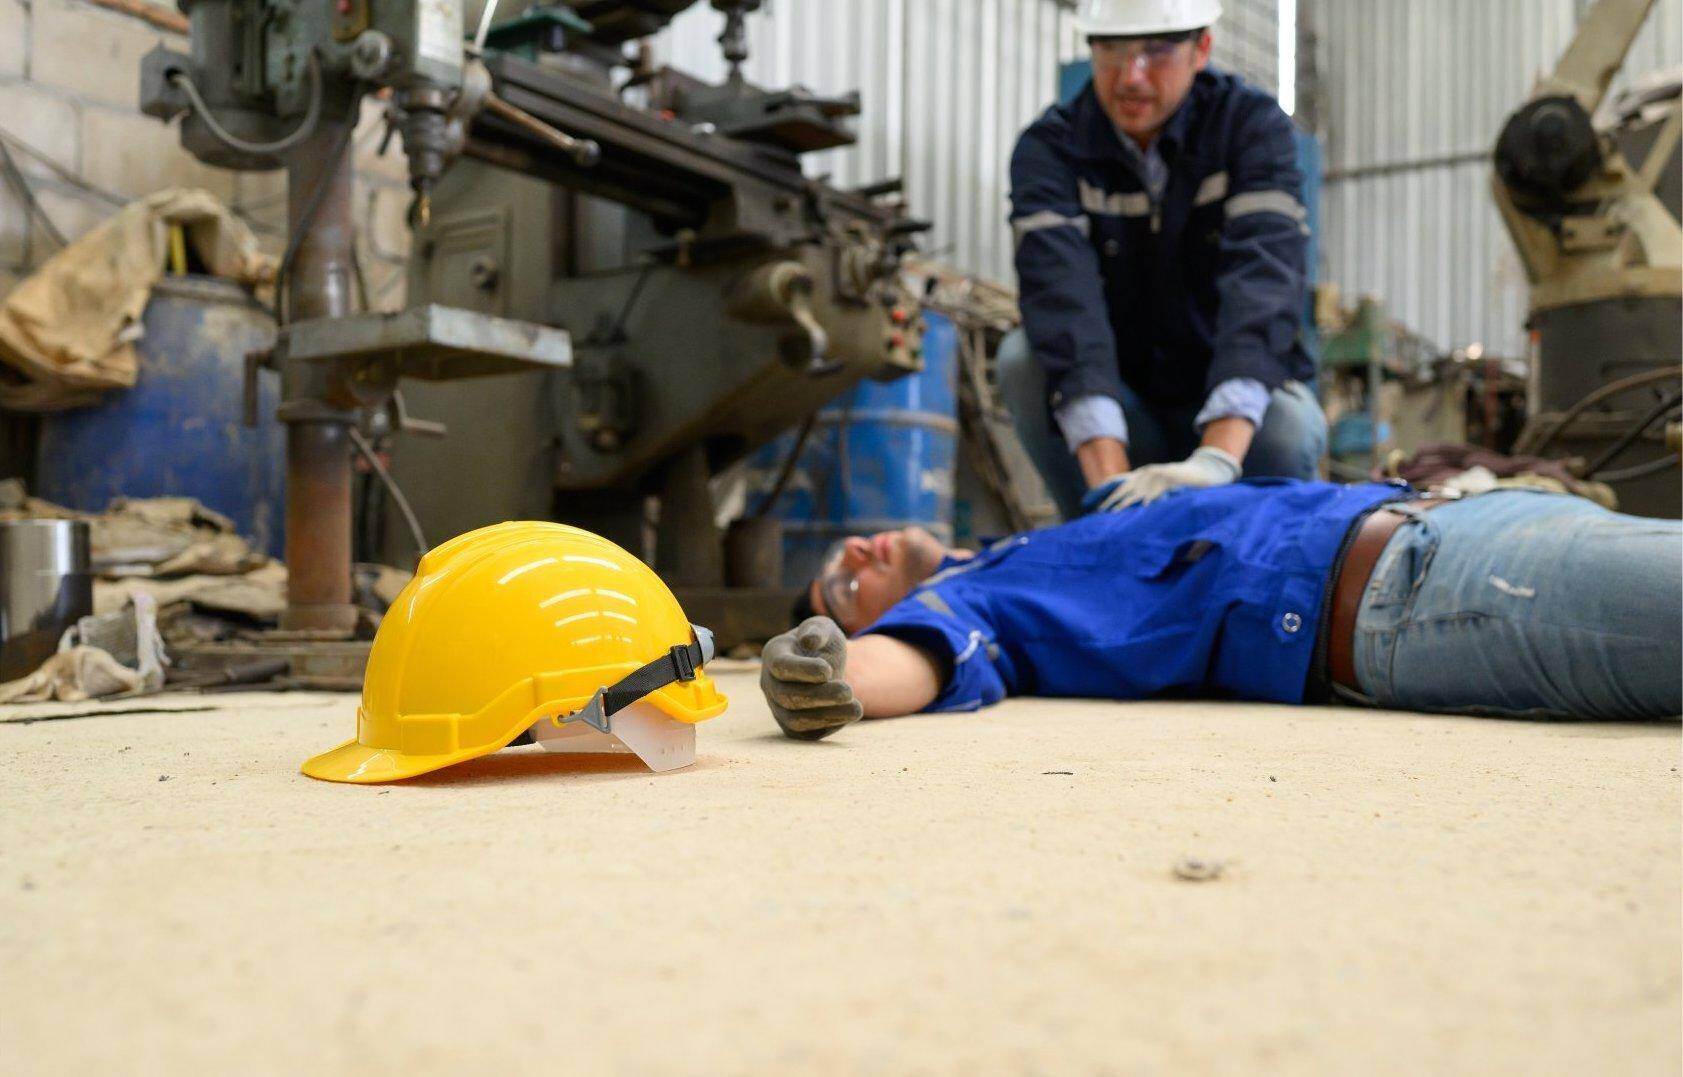 An unconscious man who has been injured on the job who will file for workers compensation in Douglas, Georgia